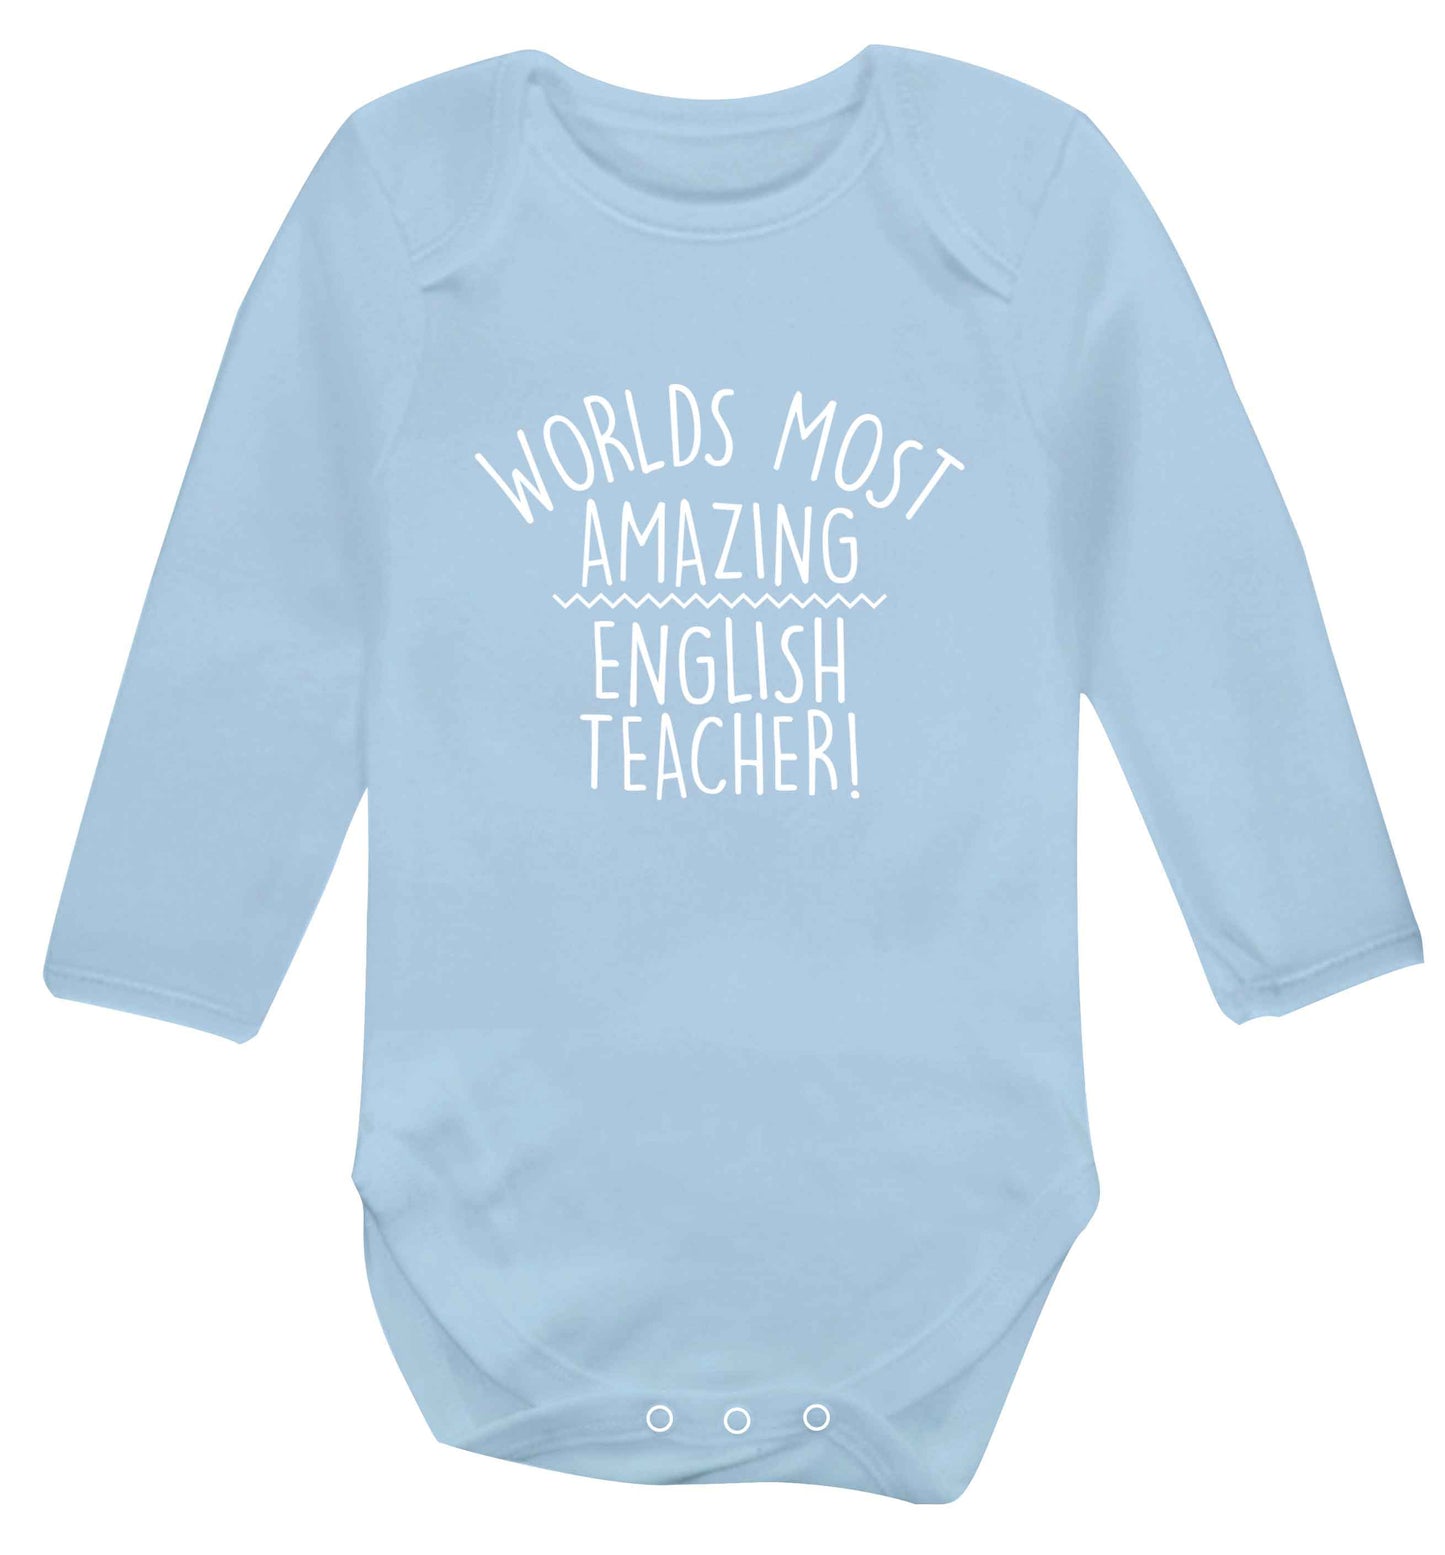 Worlds most amazing English teacher baby vest long sleeved pale blue 6-12 months